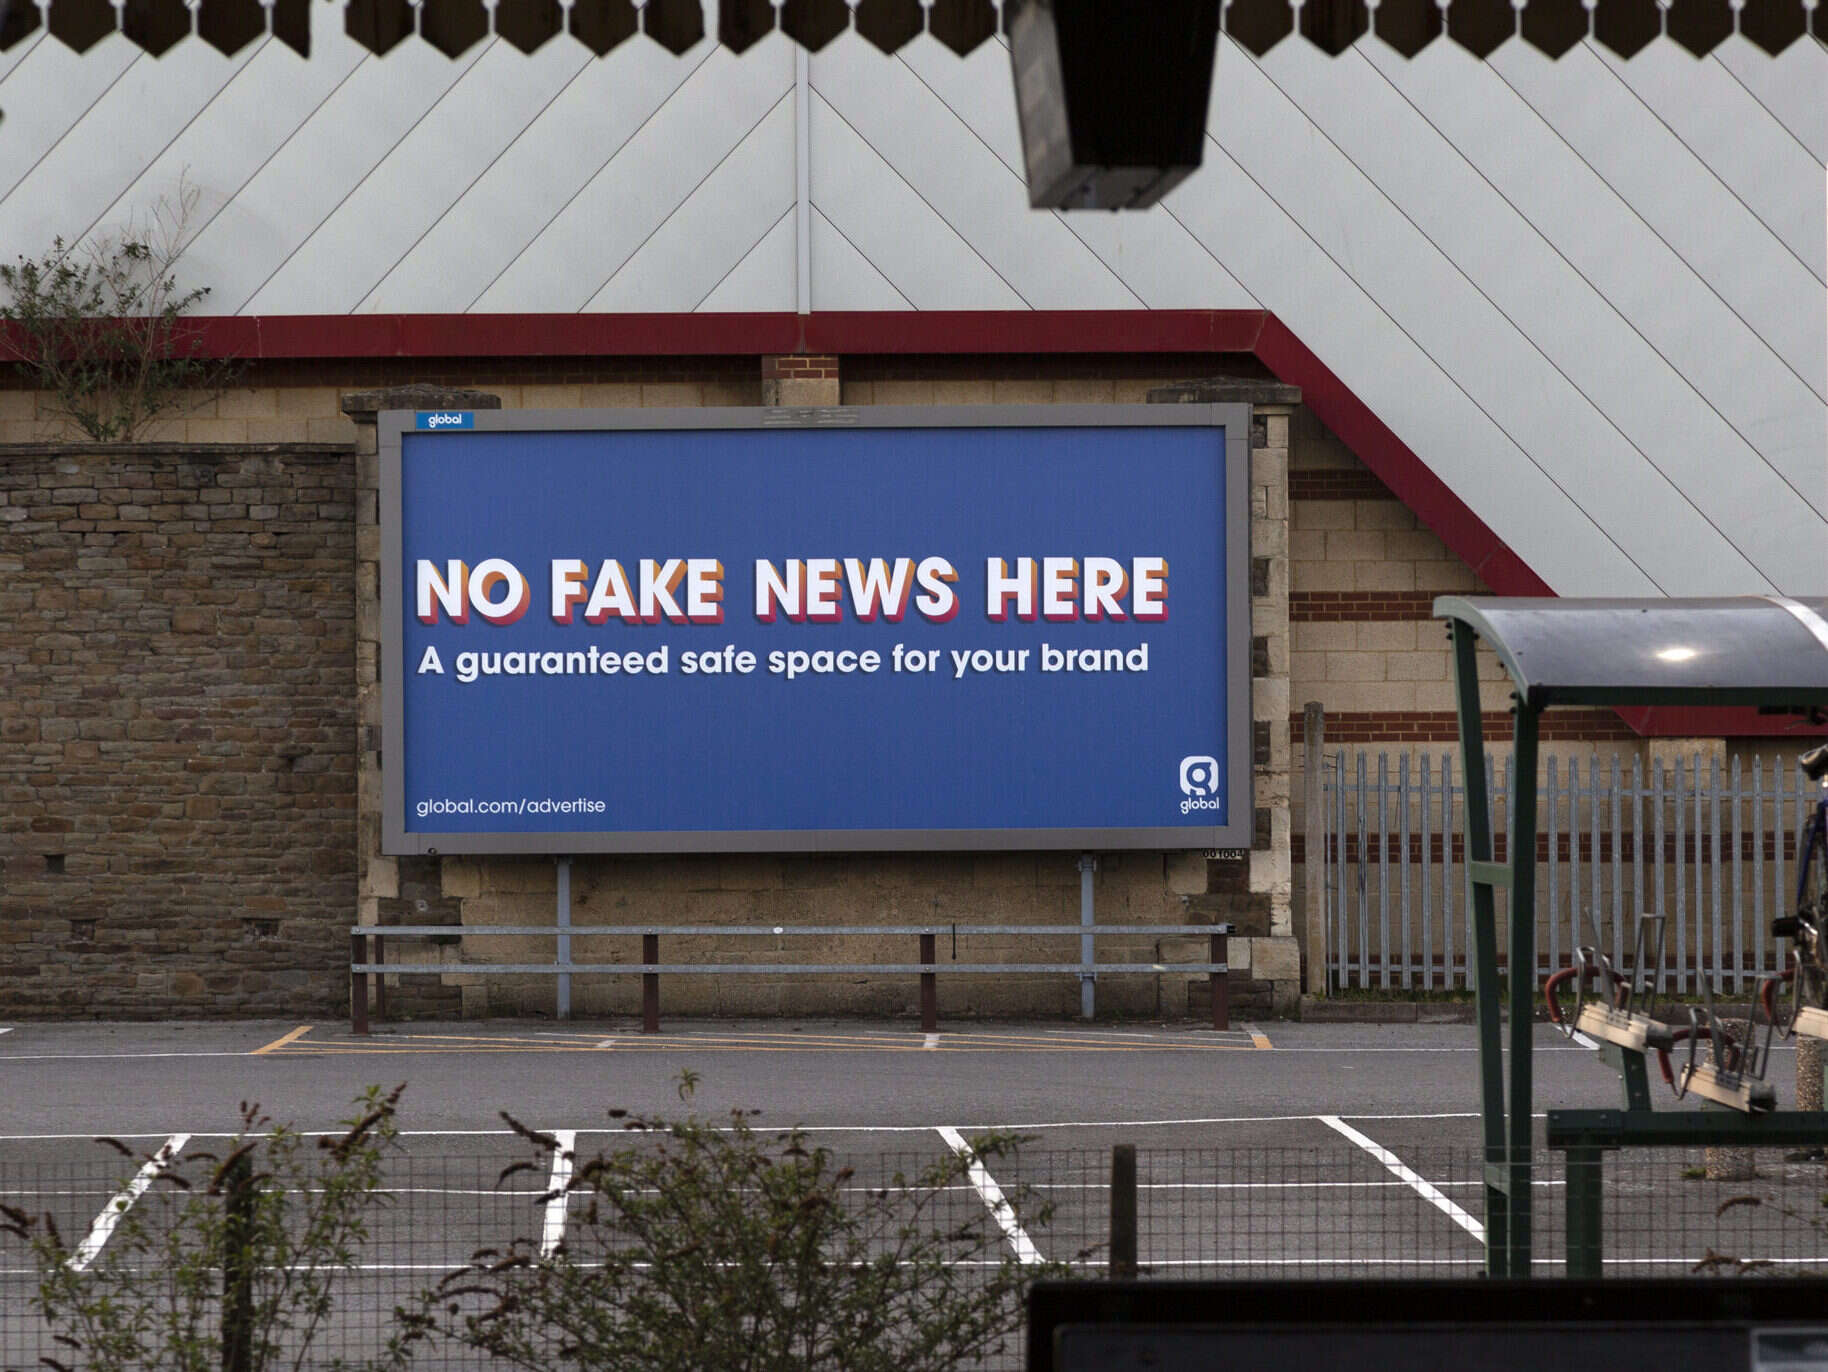 Two-thirds of British people worry about the spread of fake news